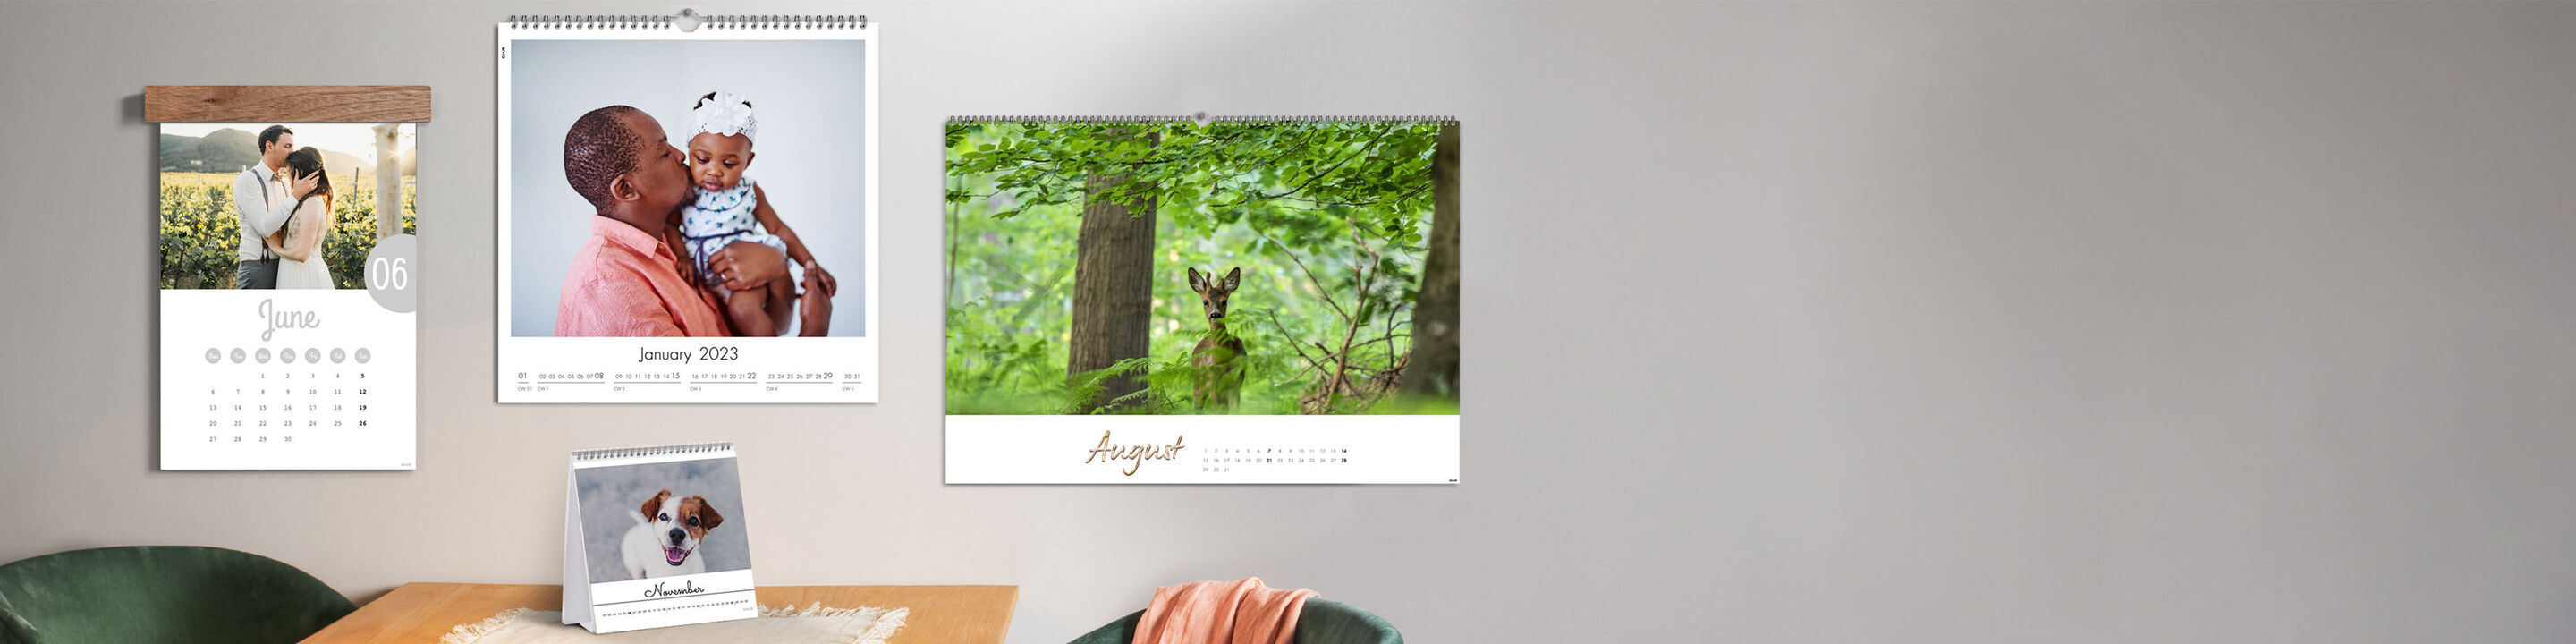 large photo wall calendars personalised with a landscape image